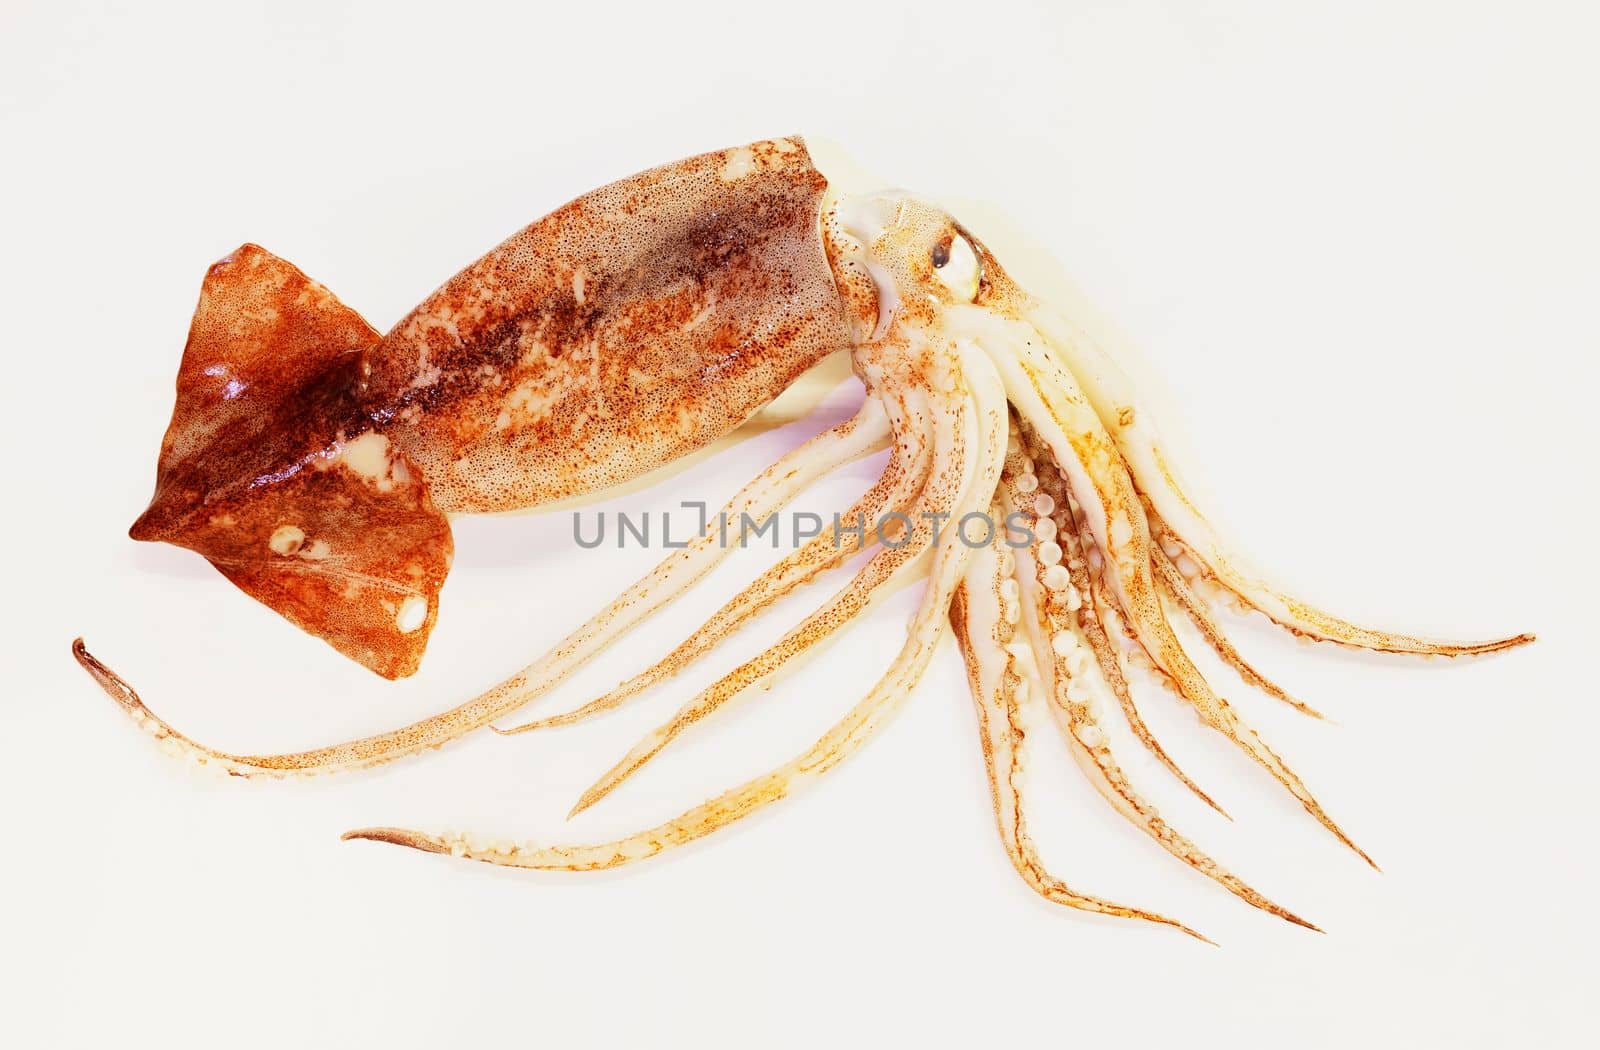  Uncooked squid fish ,cuttlefish by victimewalker